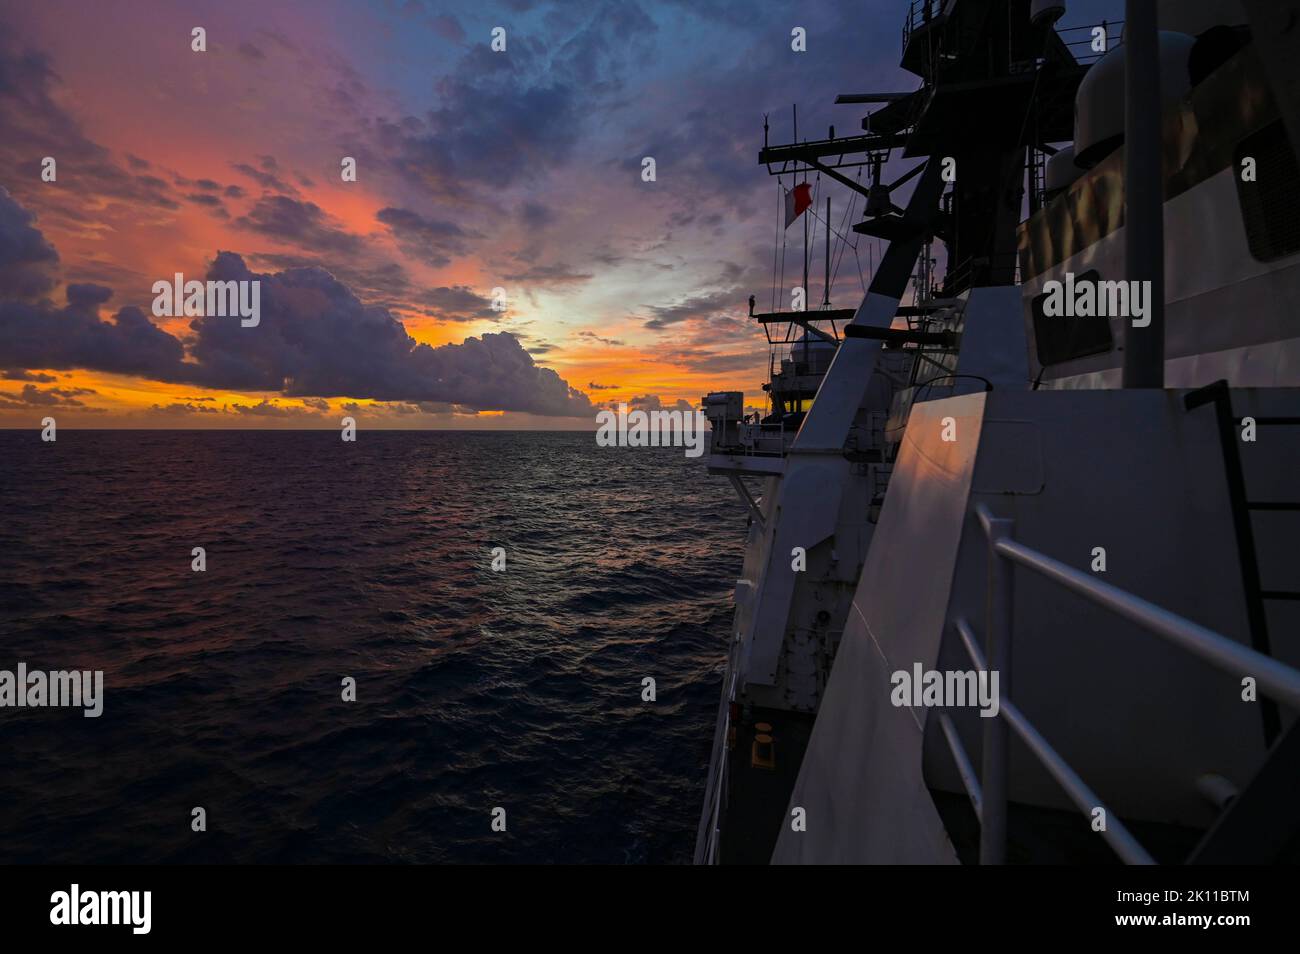 U.S. Coast Guard Cutter Midgett (WMSL 757) transits the Indian Ocean around sunset on Sep. 13, 2022. The crew of the cutter are under the tactical control of Commander, U.S. 7th Fleet. (U.S. Coast Guard photo by Petty Officer Steve Strohmaier) Stock Photo